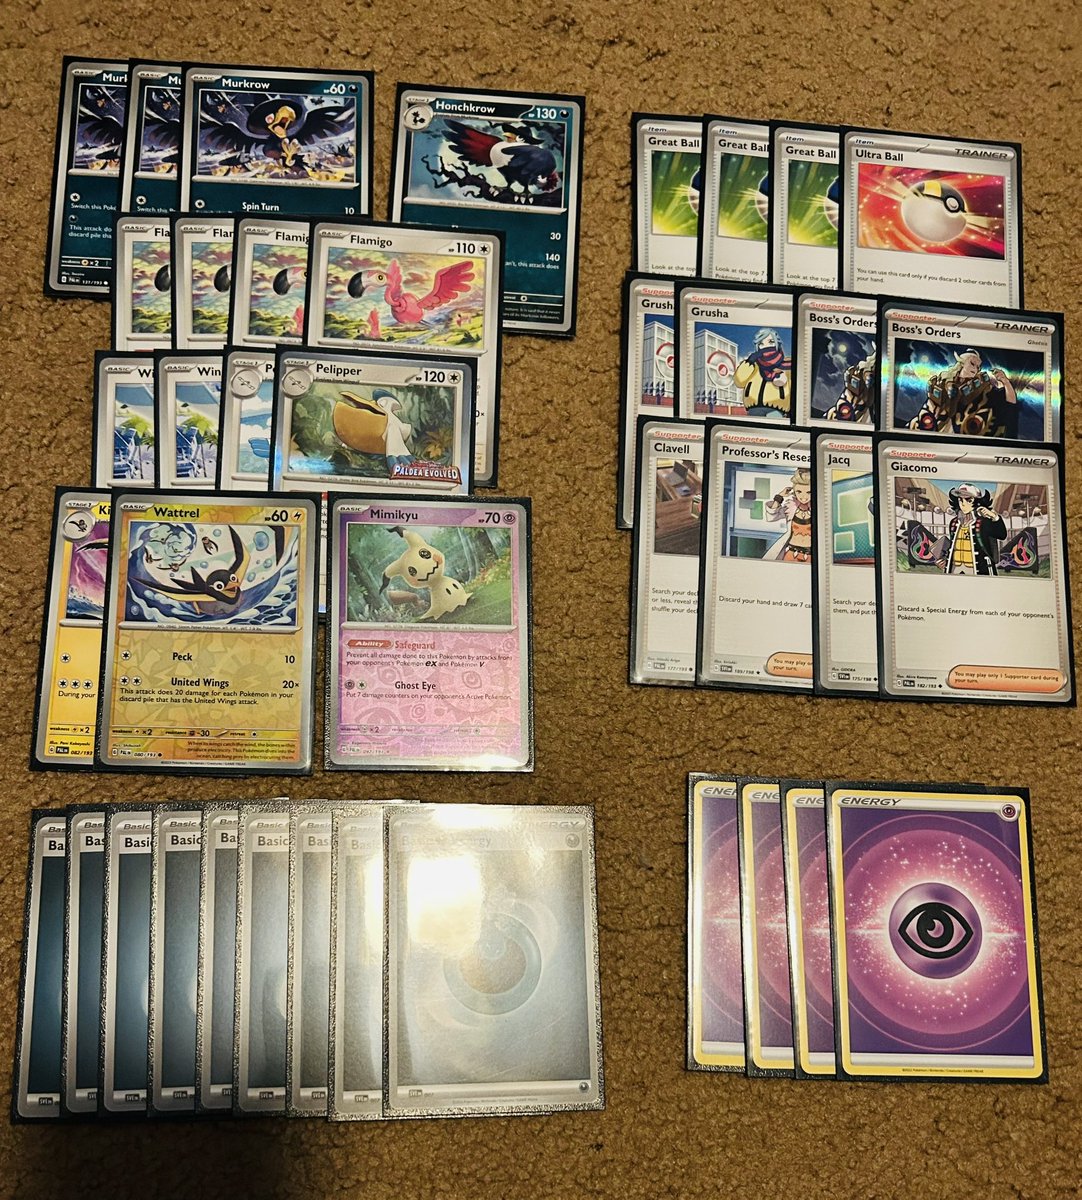 I went 3-0 in my Paldea Evolved prerelease! My promo was Pelipper and I got the United Wings half kit with it, so I played BIRDS. Opening the Wattrel made bird math way better, and opening a second Boss’s Orders was crazy too. I even used the Honchkrow!